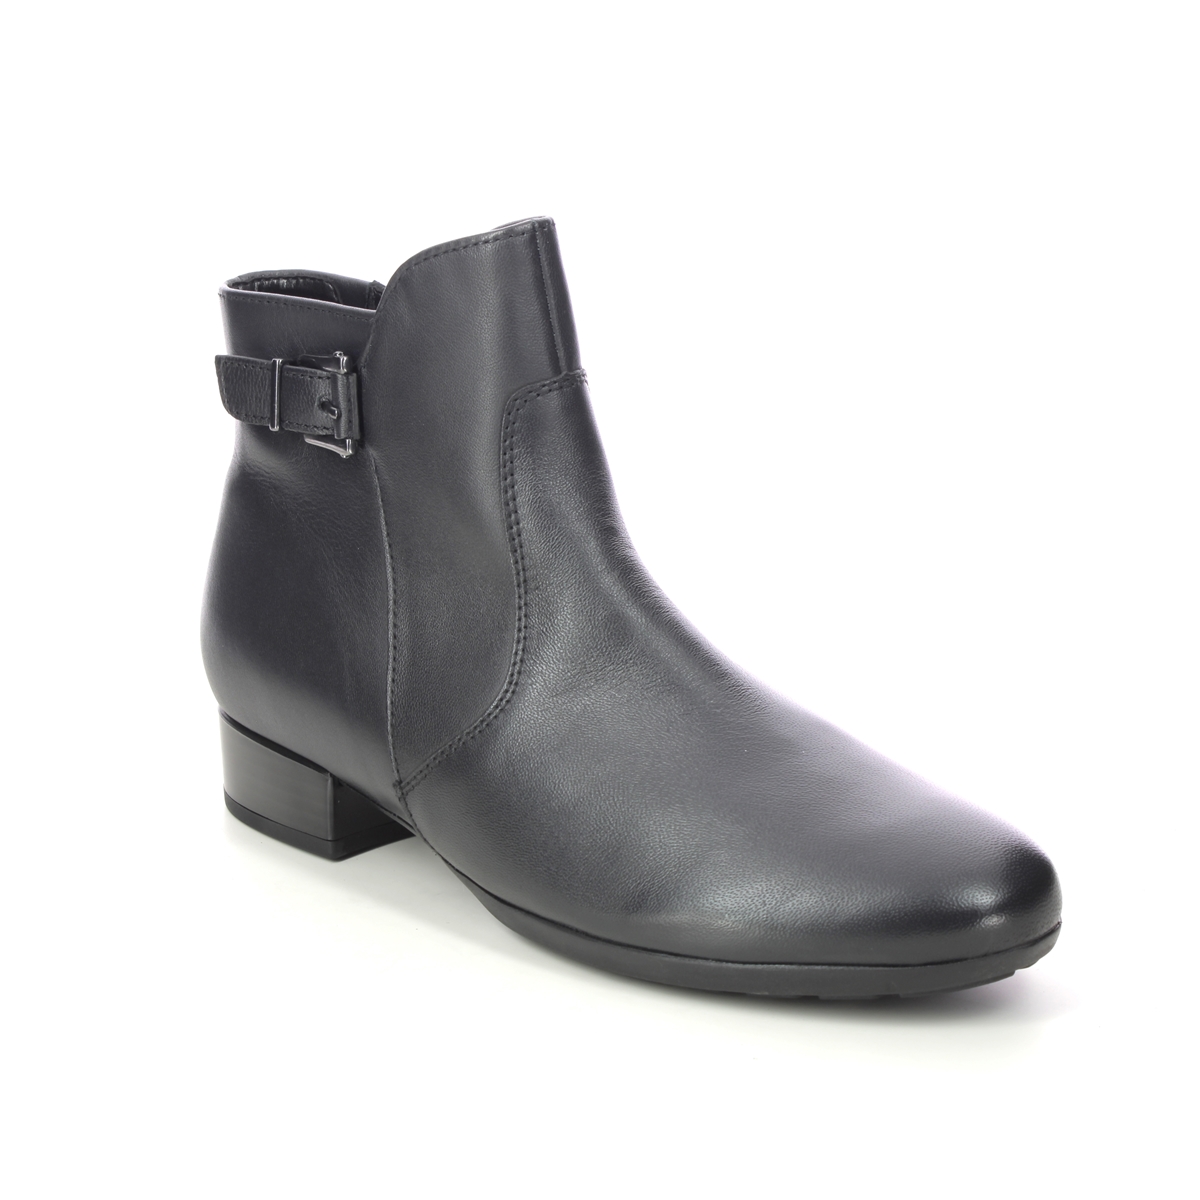 Gabor Bolan Wide Breck Navy leather Womens Heeled Boots 32.714.26 in a Plain Leather in Size 7